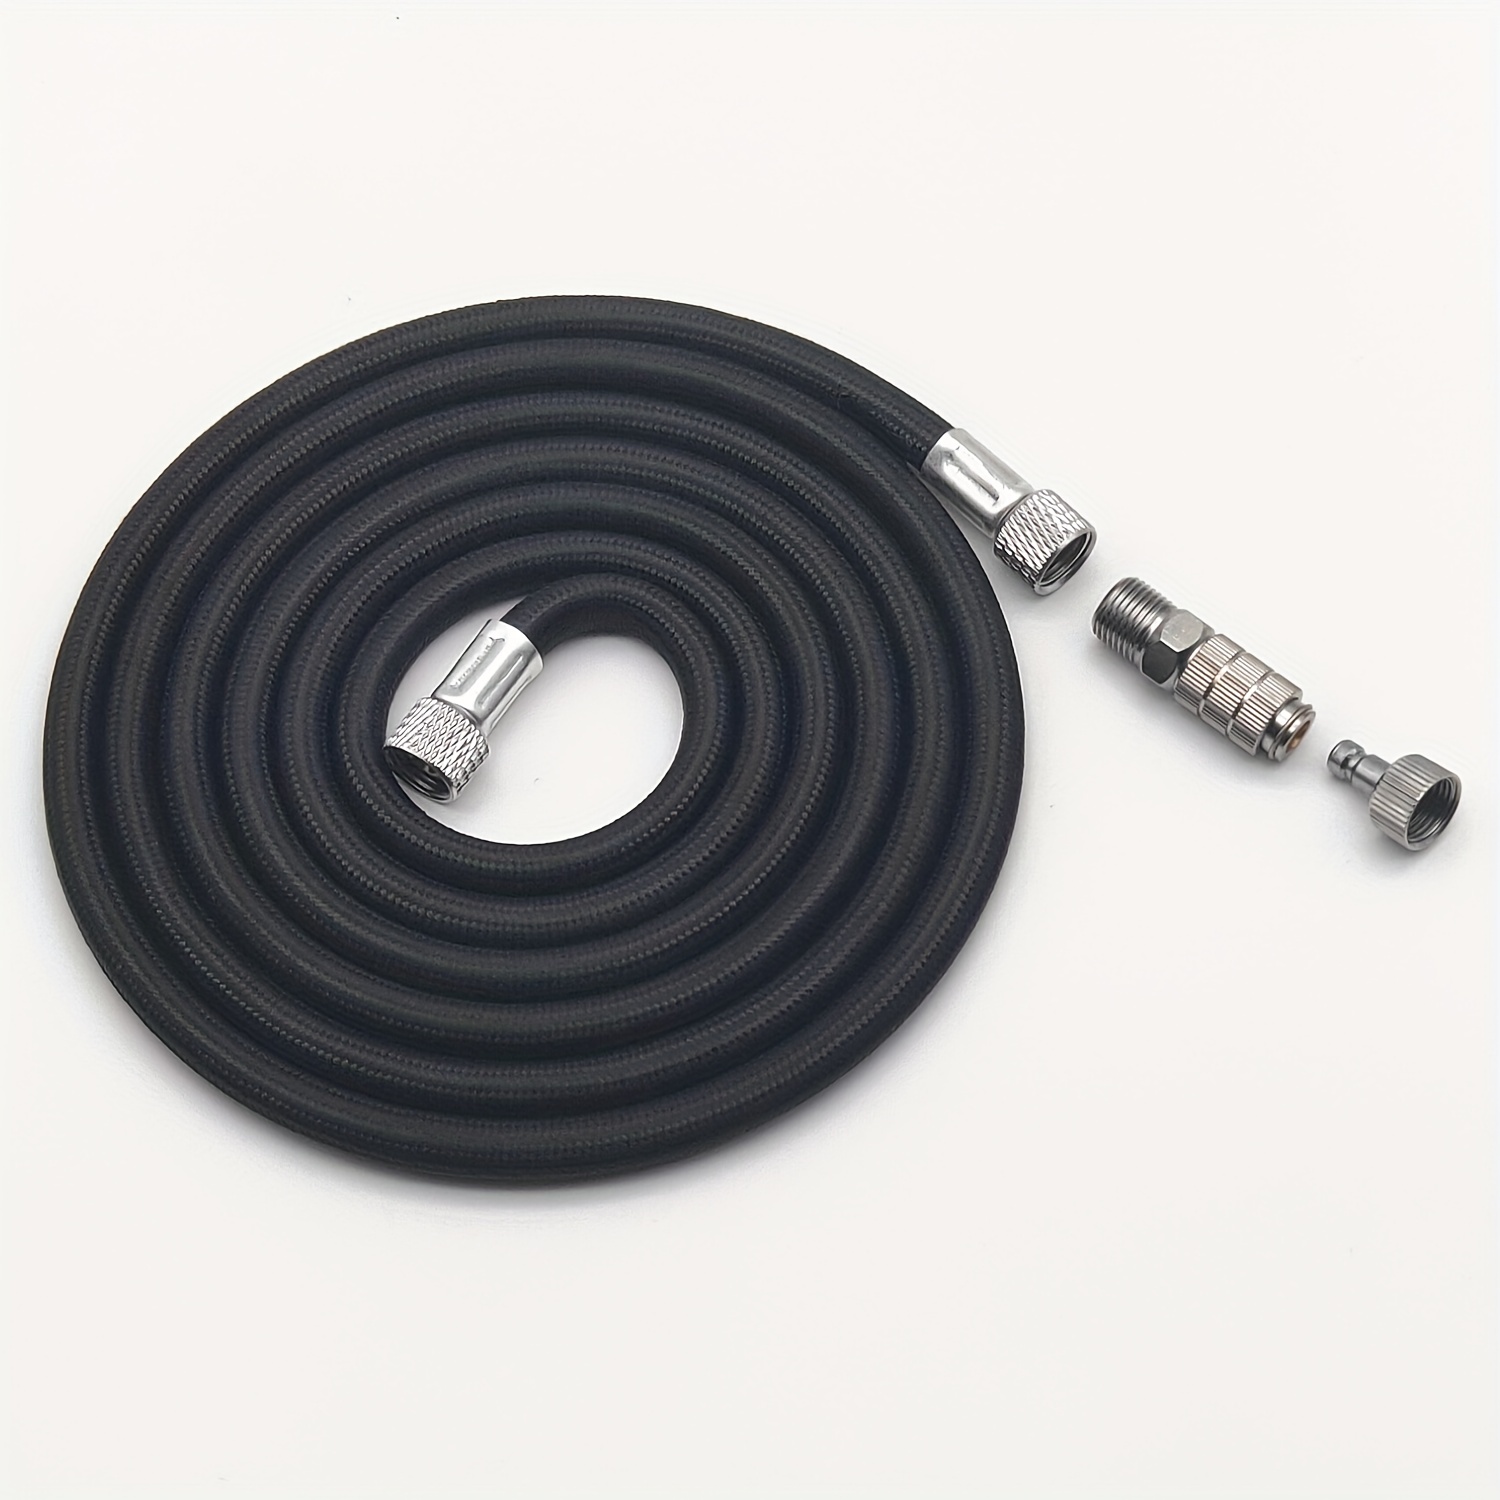 6' Braided Airbrush Air Hose with Paasche & 1/4 Fitting Ends Regulator  Compressor